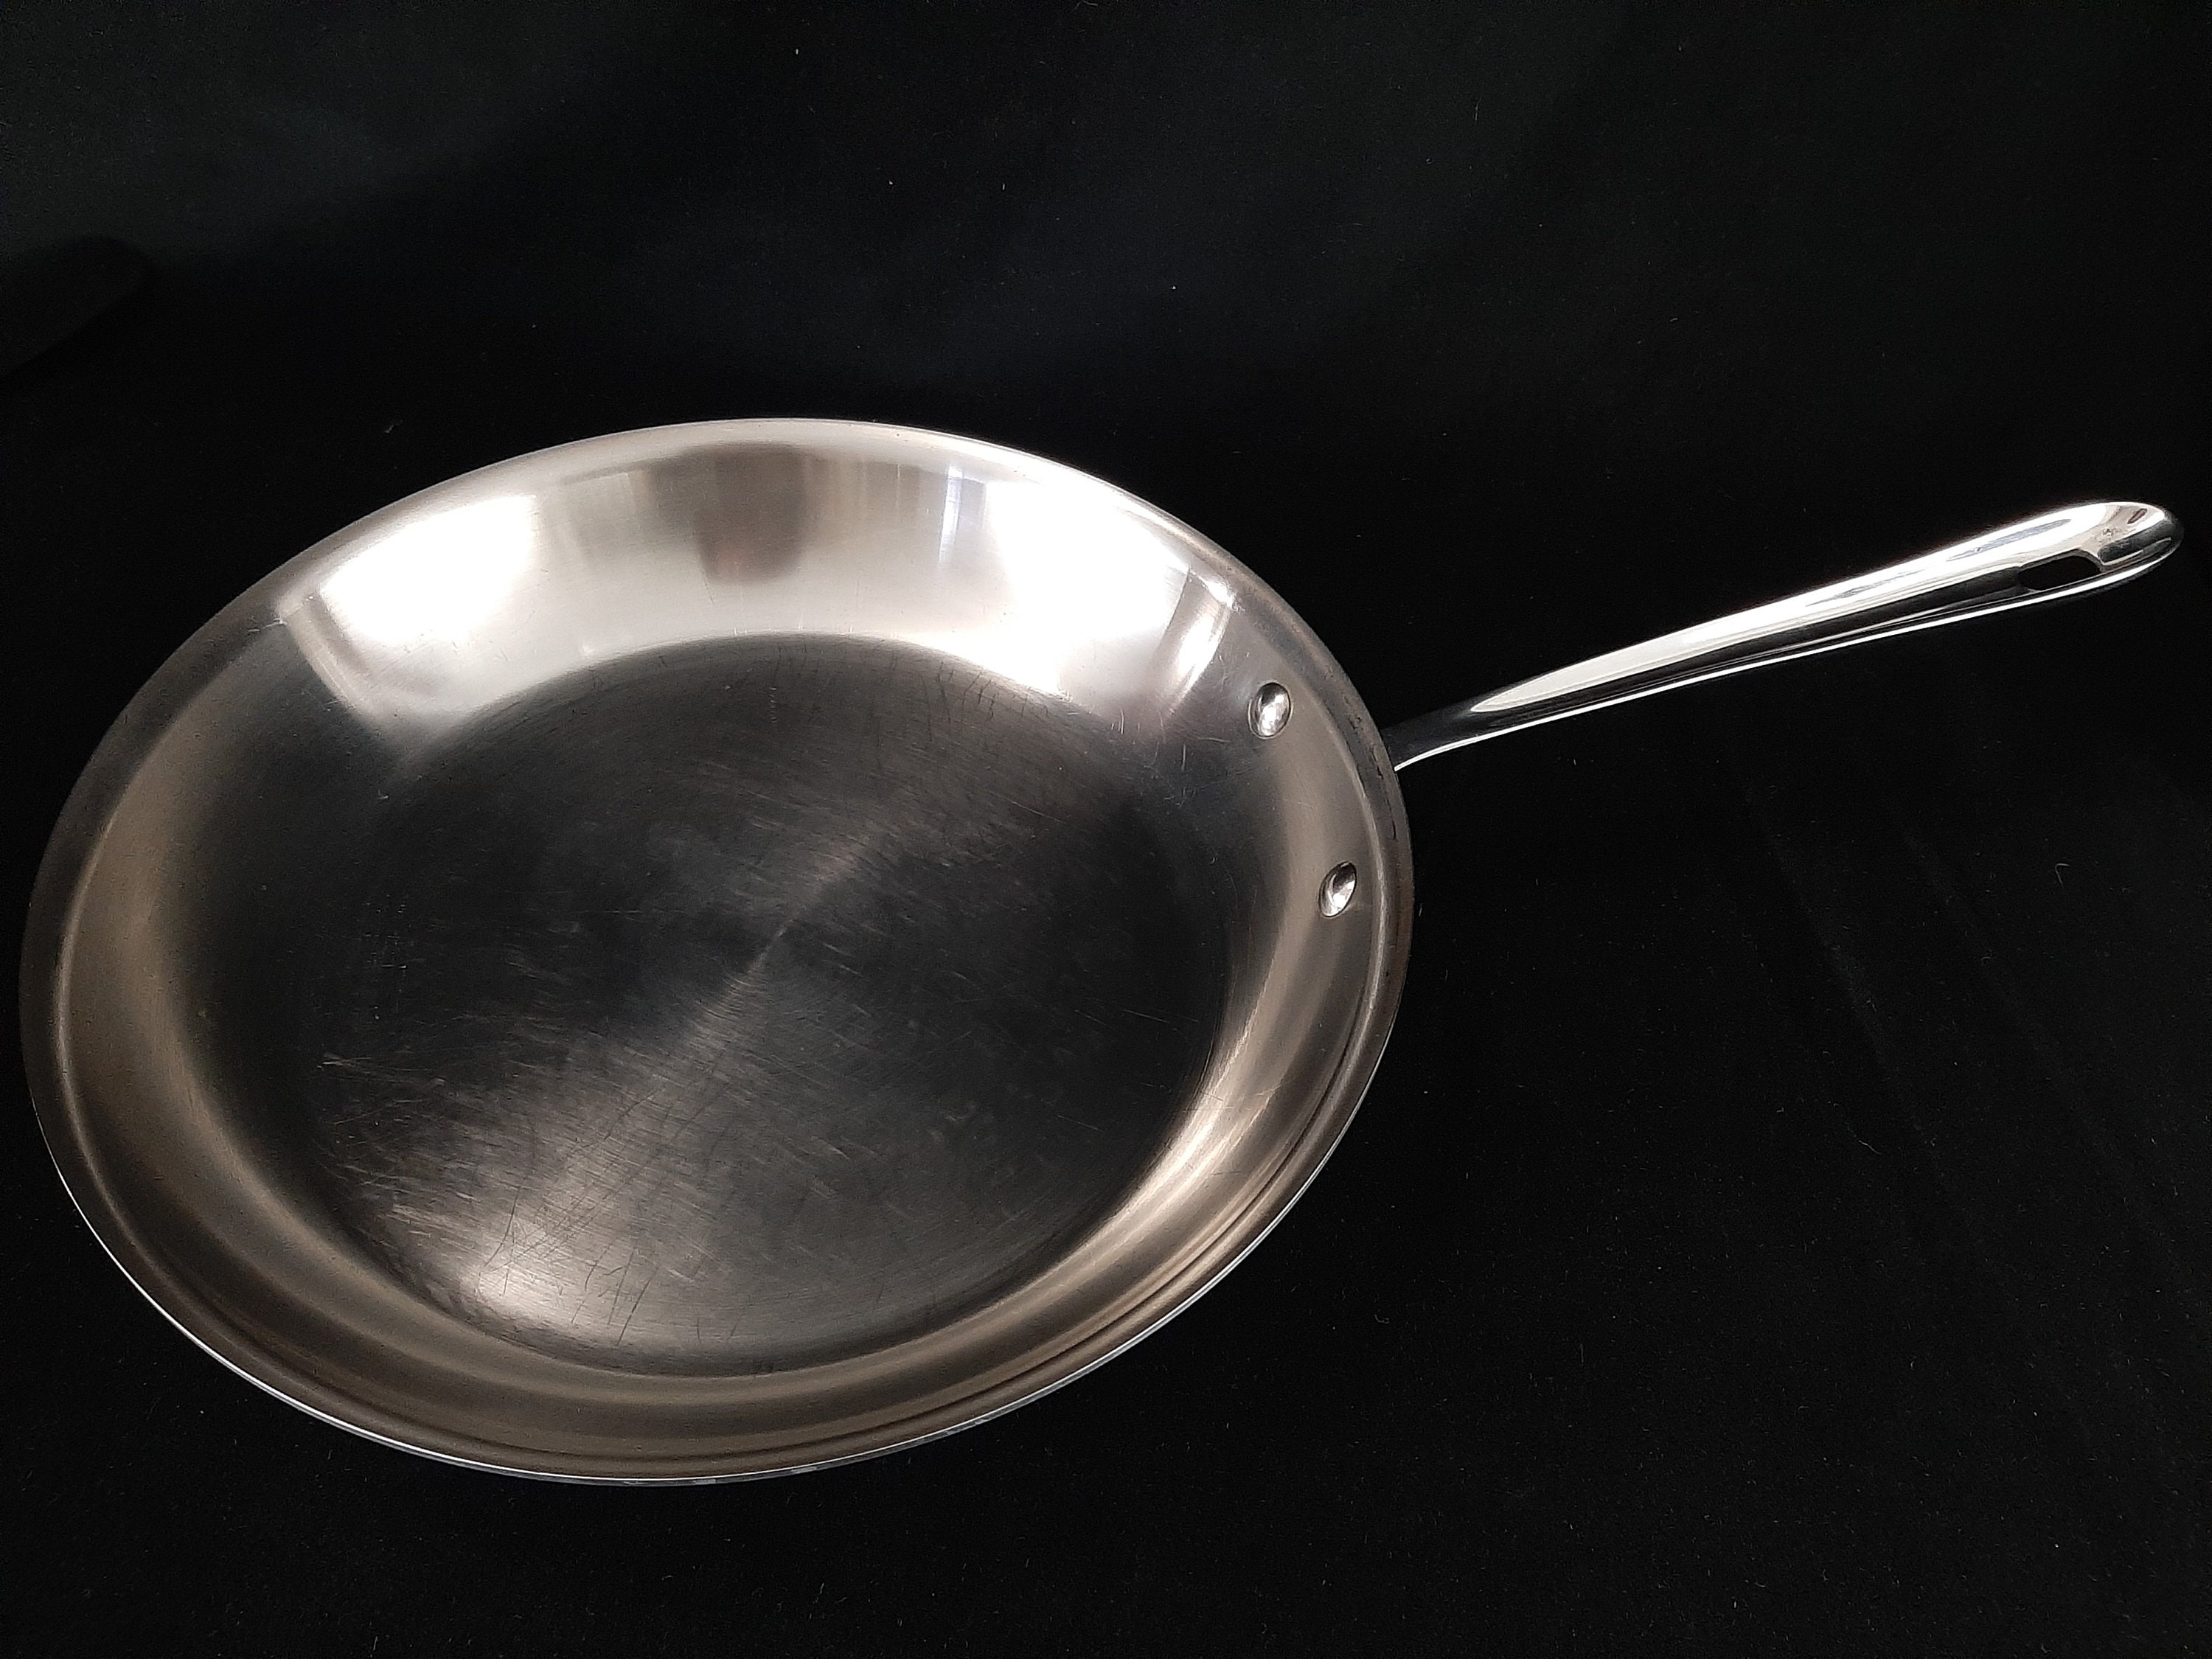 ALL-CLAD 12 FRY PAN WITH LID , STAINLESS STEEL 3-PLY BONDED - Signature  Art Ware